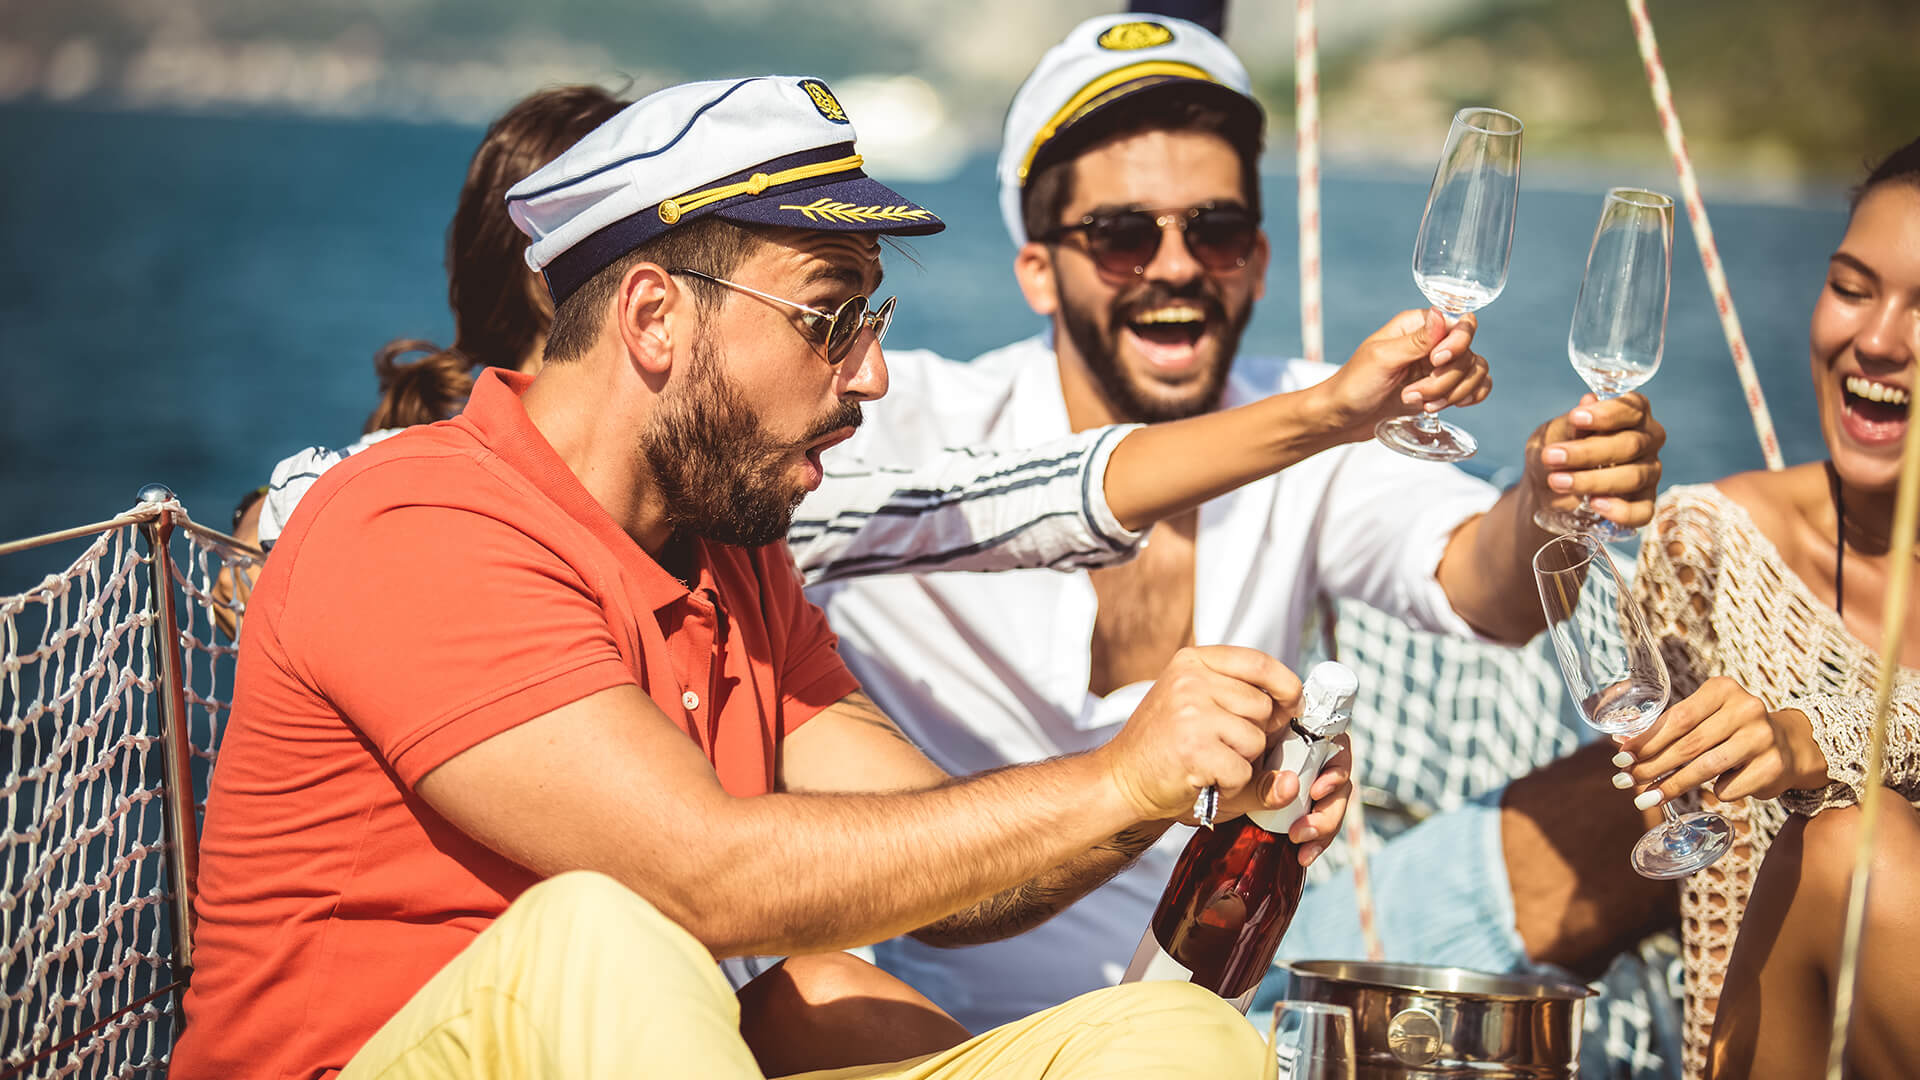 LUXlife's Guide To Planning An Unforgettable Yacht Party - LUXlife